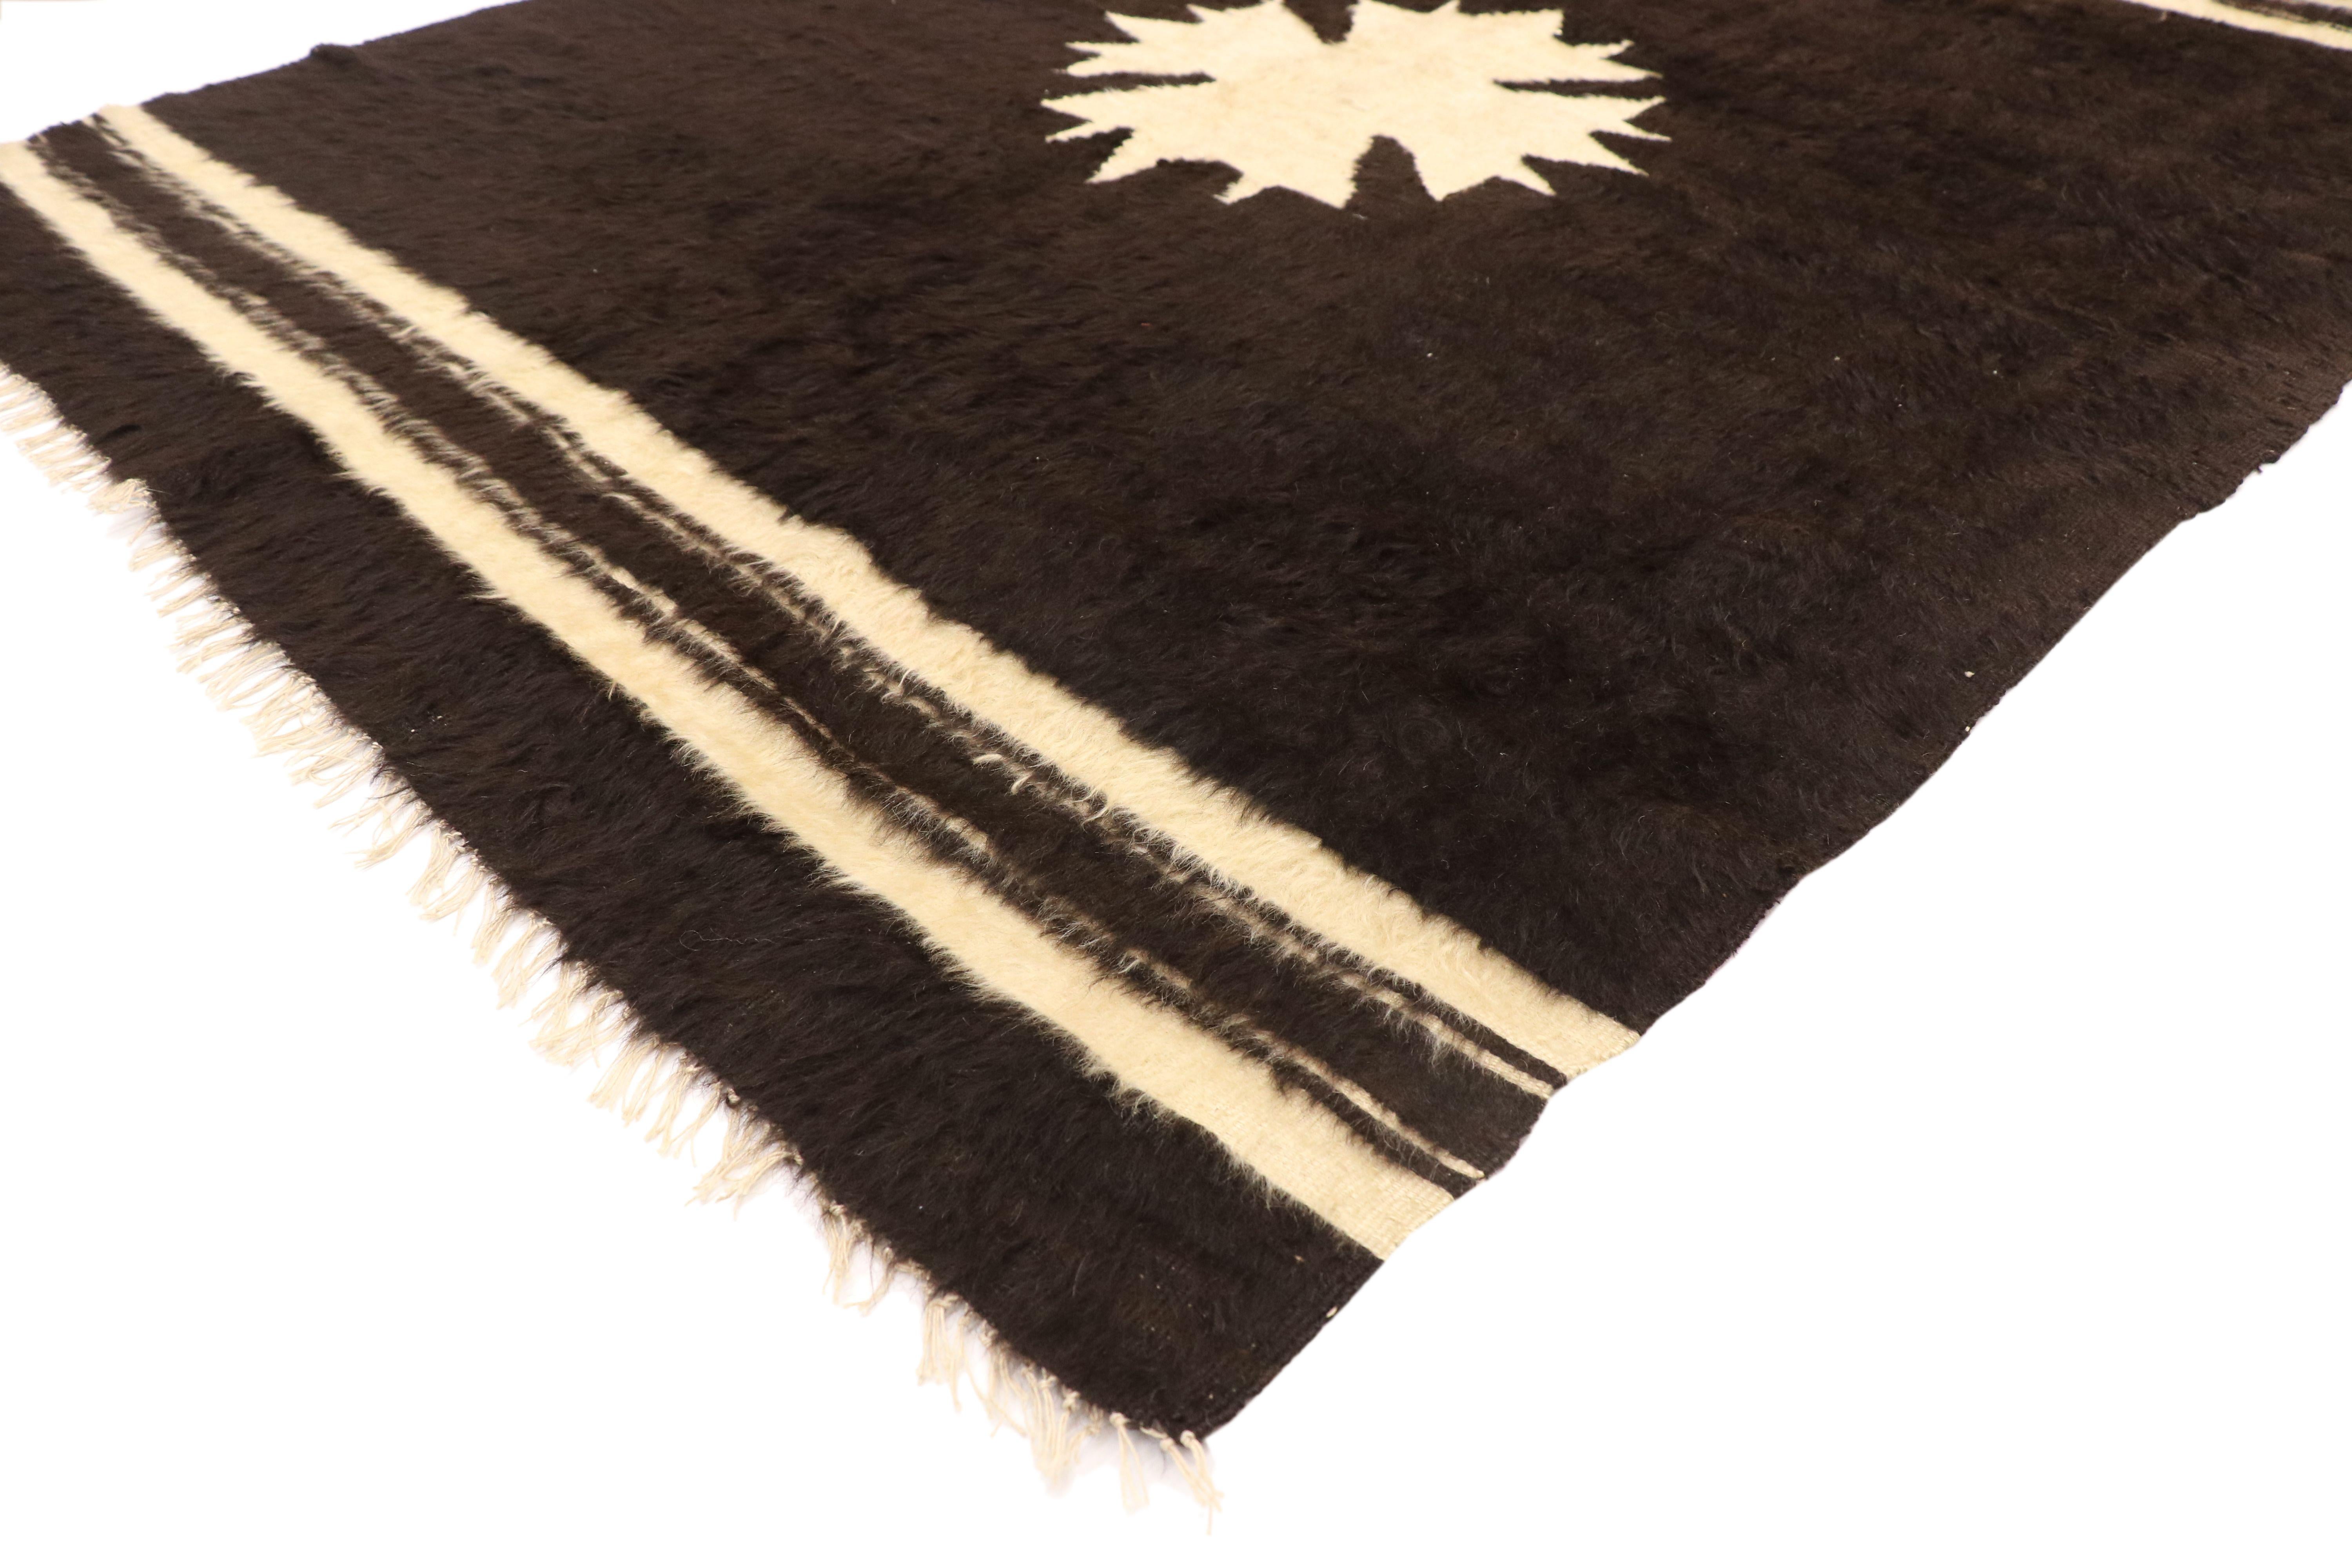 52837 vintage Turkish Angora Blanket rug with Mid-Century Modern style 04'09 x 05'09. With its minimalist design, plush texture, this vintage Turkish angora blanket rug is a captivating vision of woven beauty. It features an Anatolian star medallion